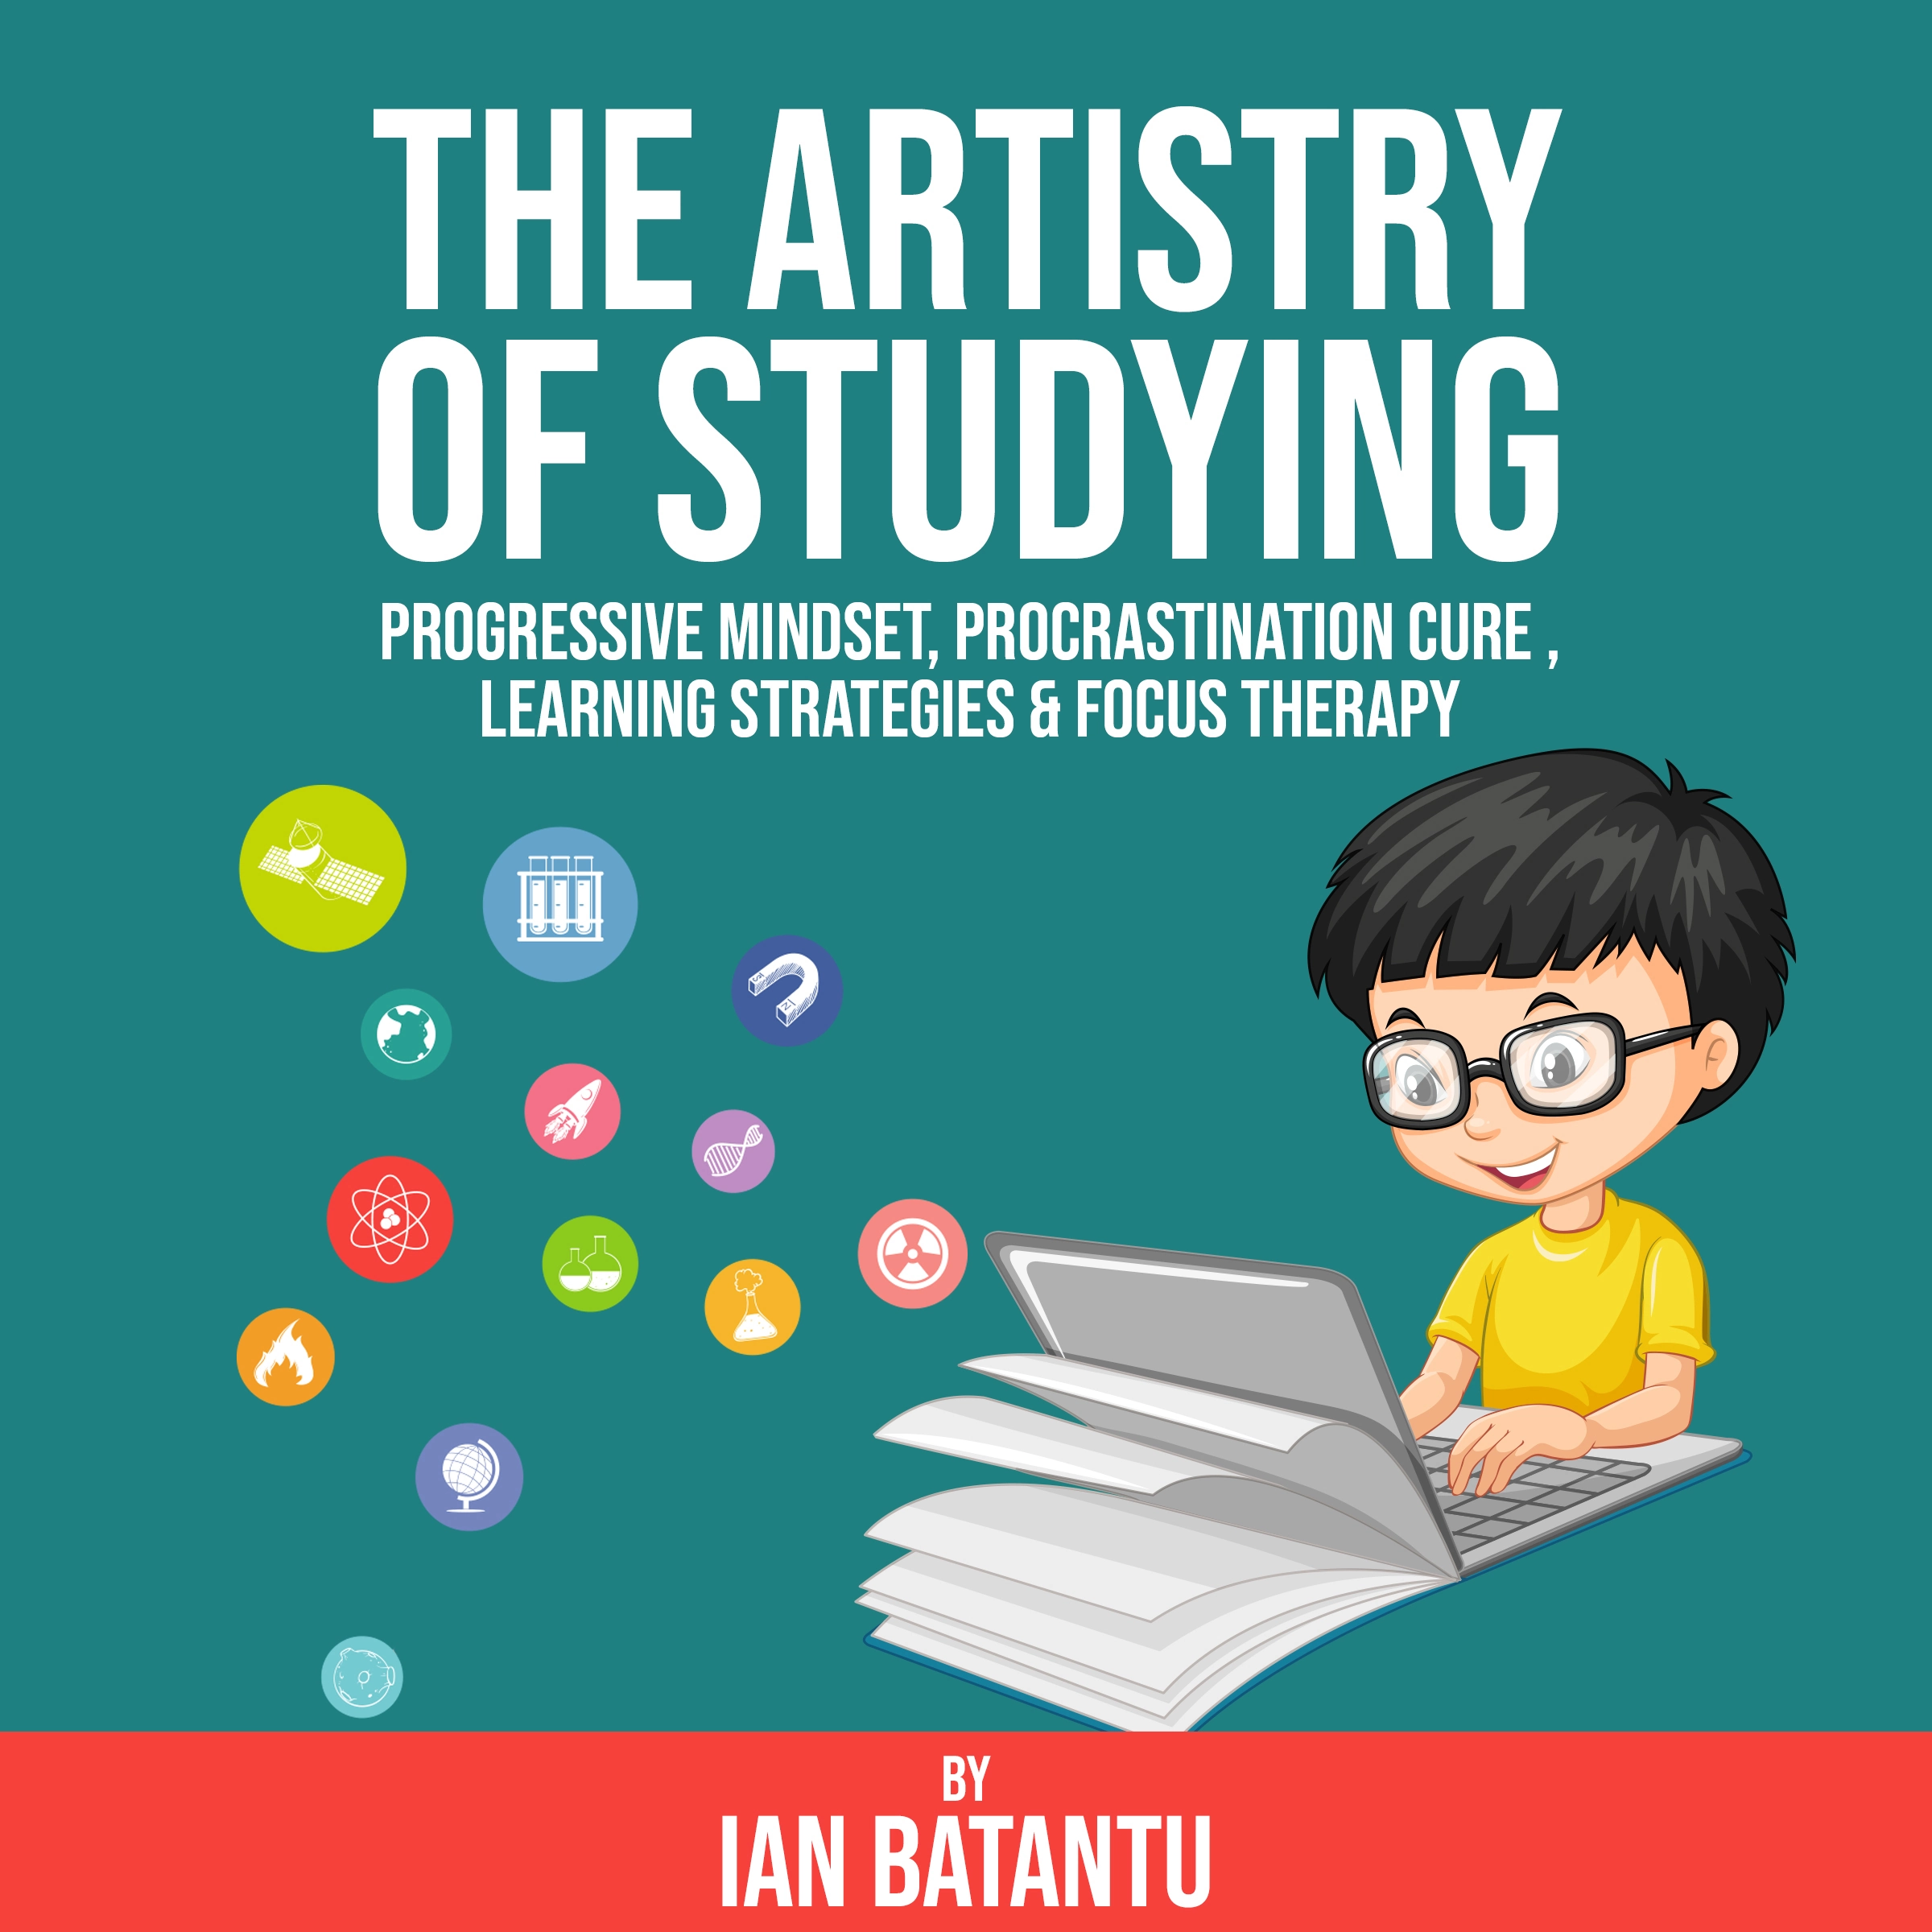 The Artistry Of Studying - Progressive Mindset, Procrastination Cure, Learning Strategies & Focus Therapy Audiobook by ian batantu